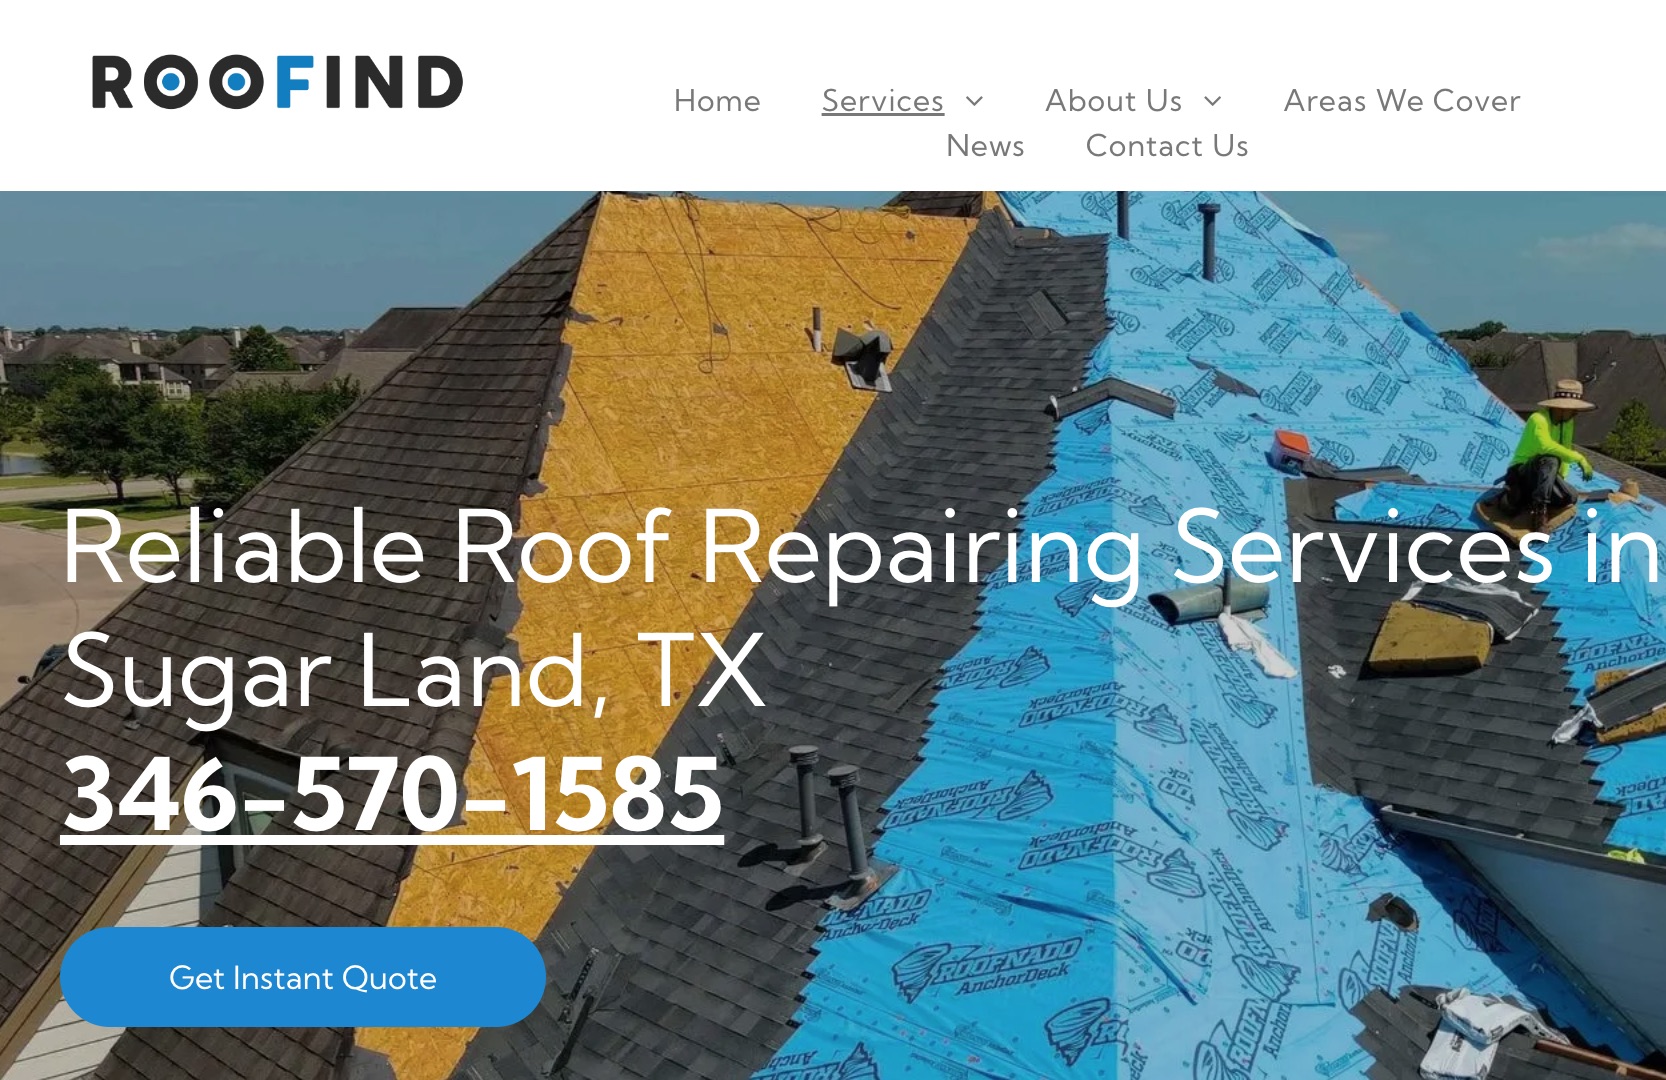 Houston’s Roofing Gem: Roofind’s Commitment to Excellence